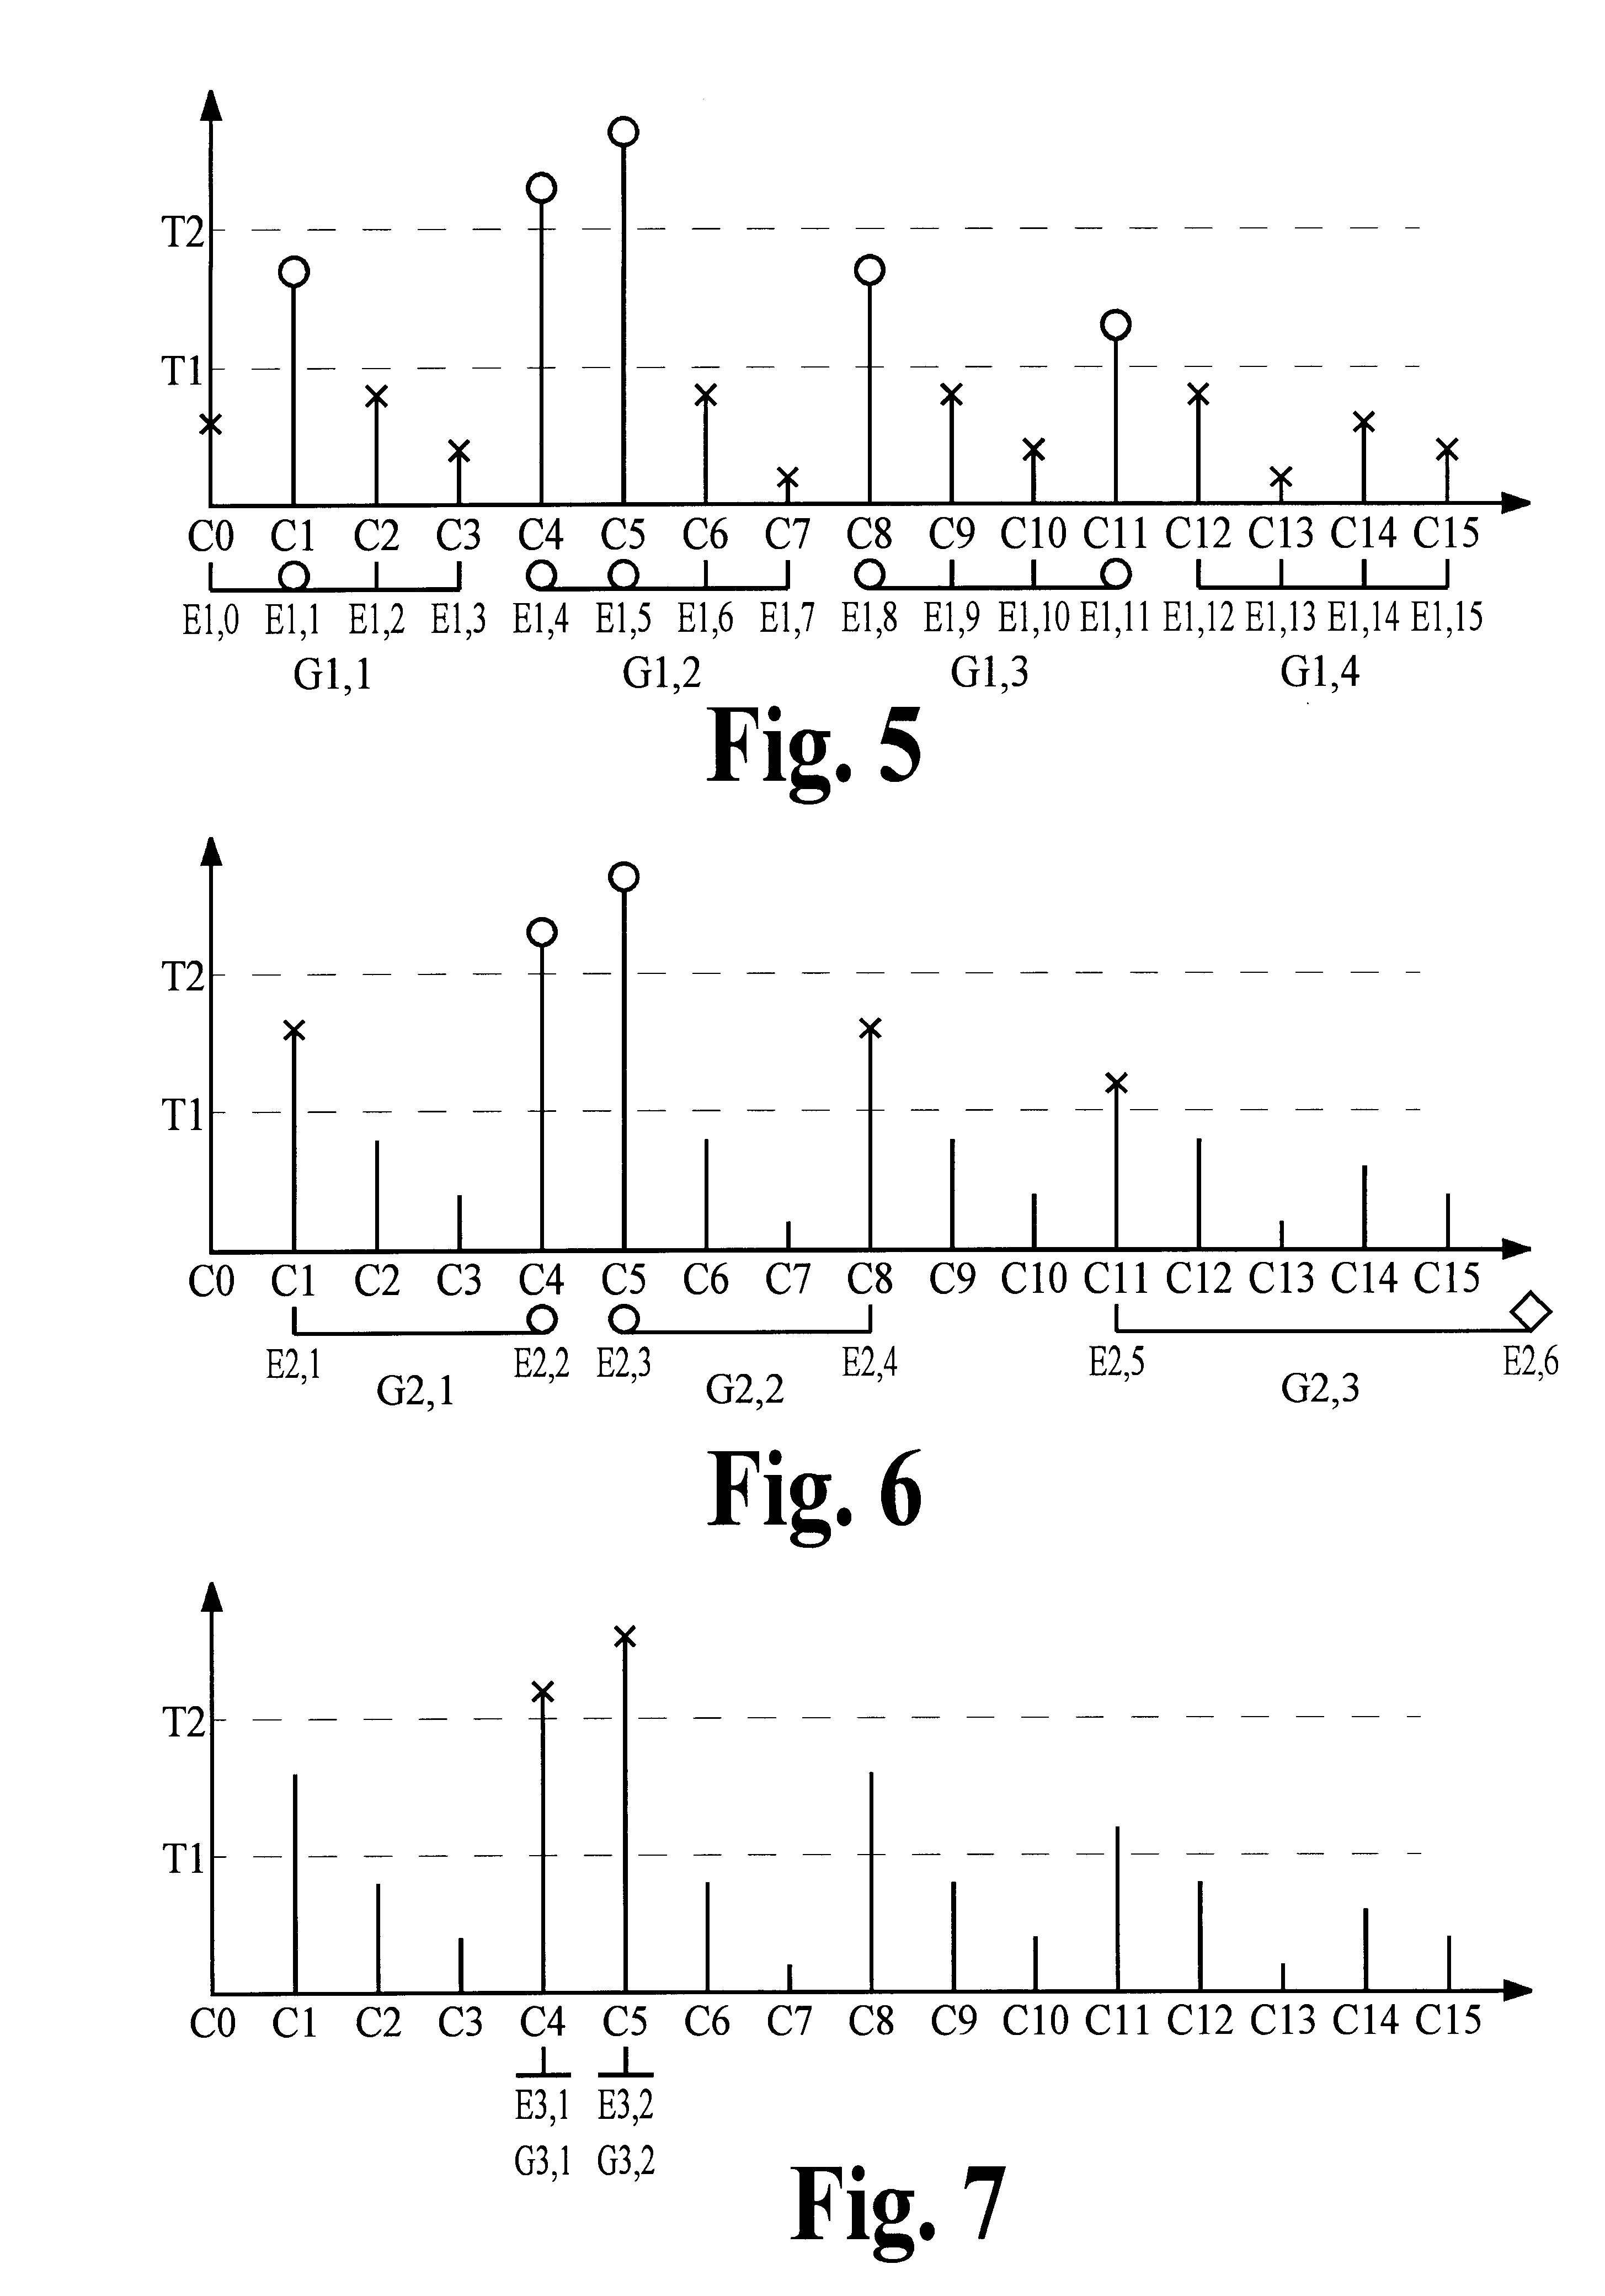 Multi-stage encoding of signal components that are classified according to component value